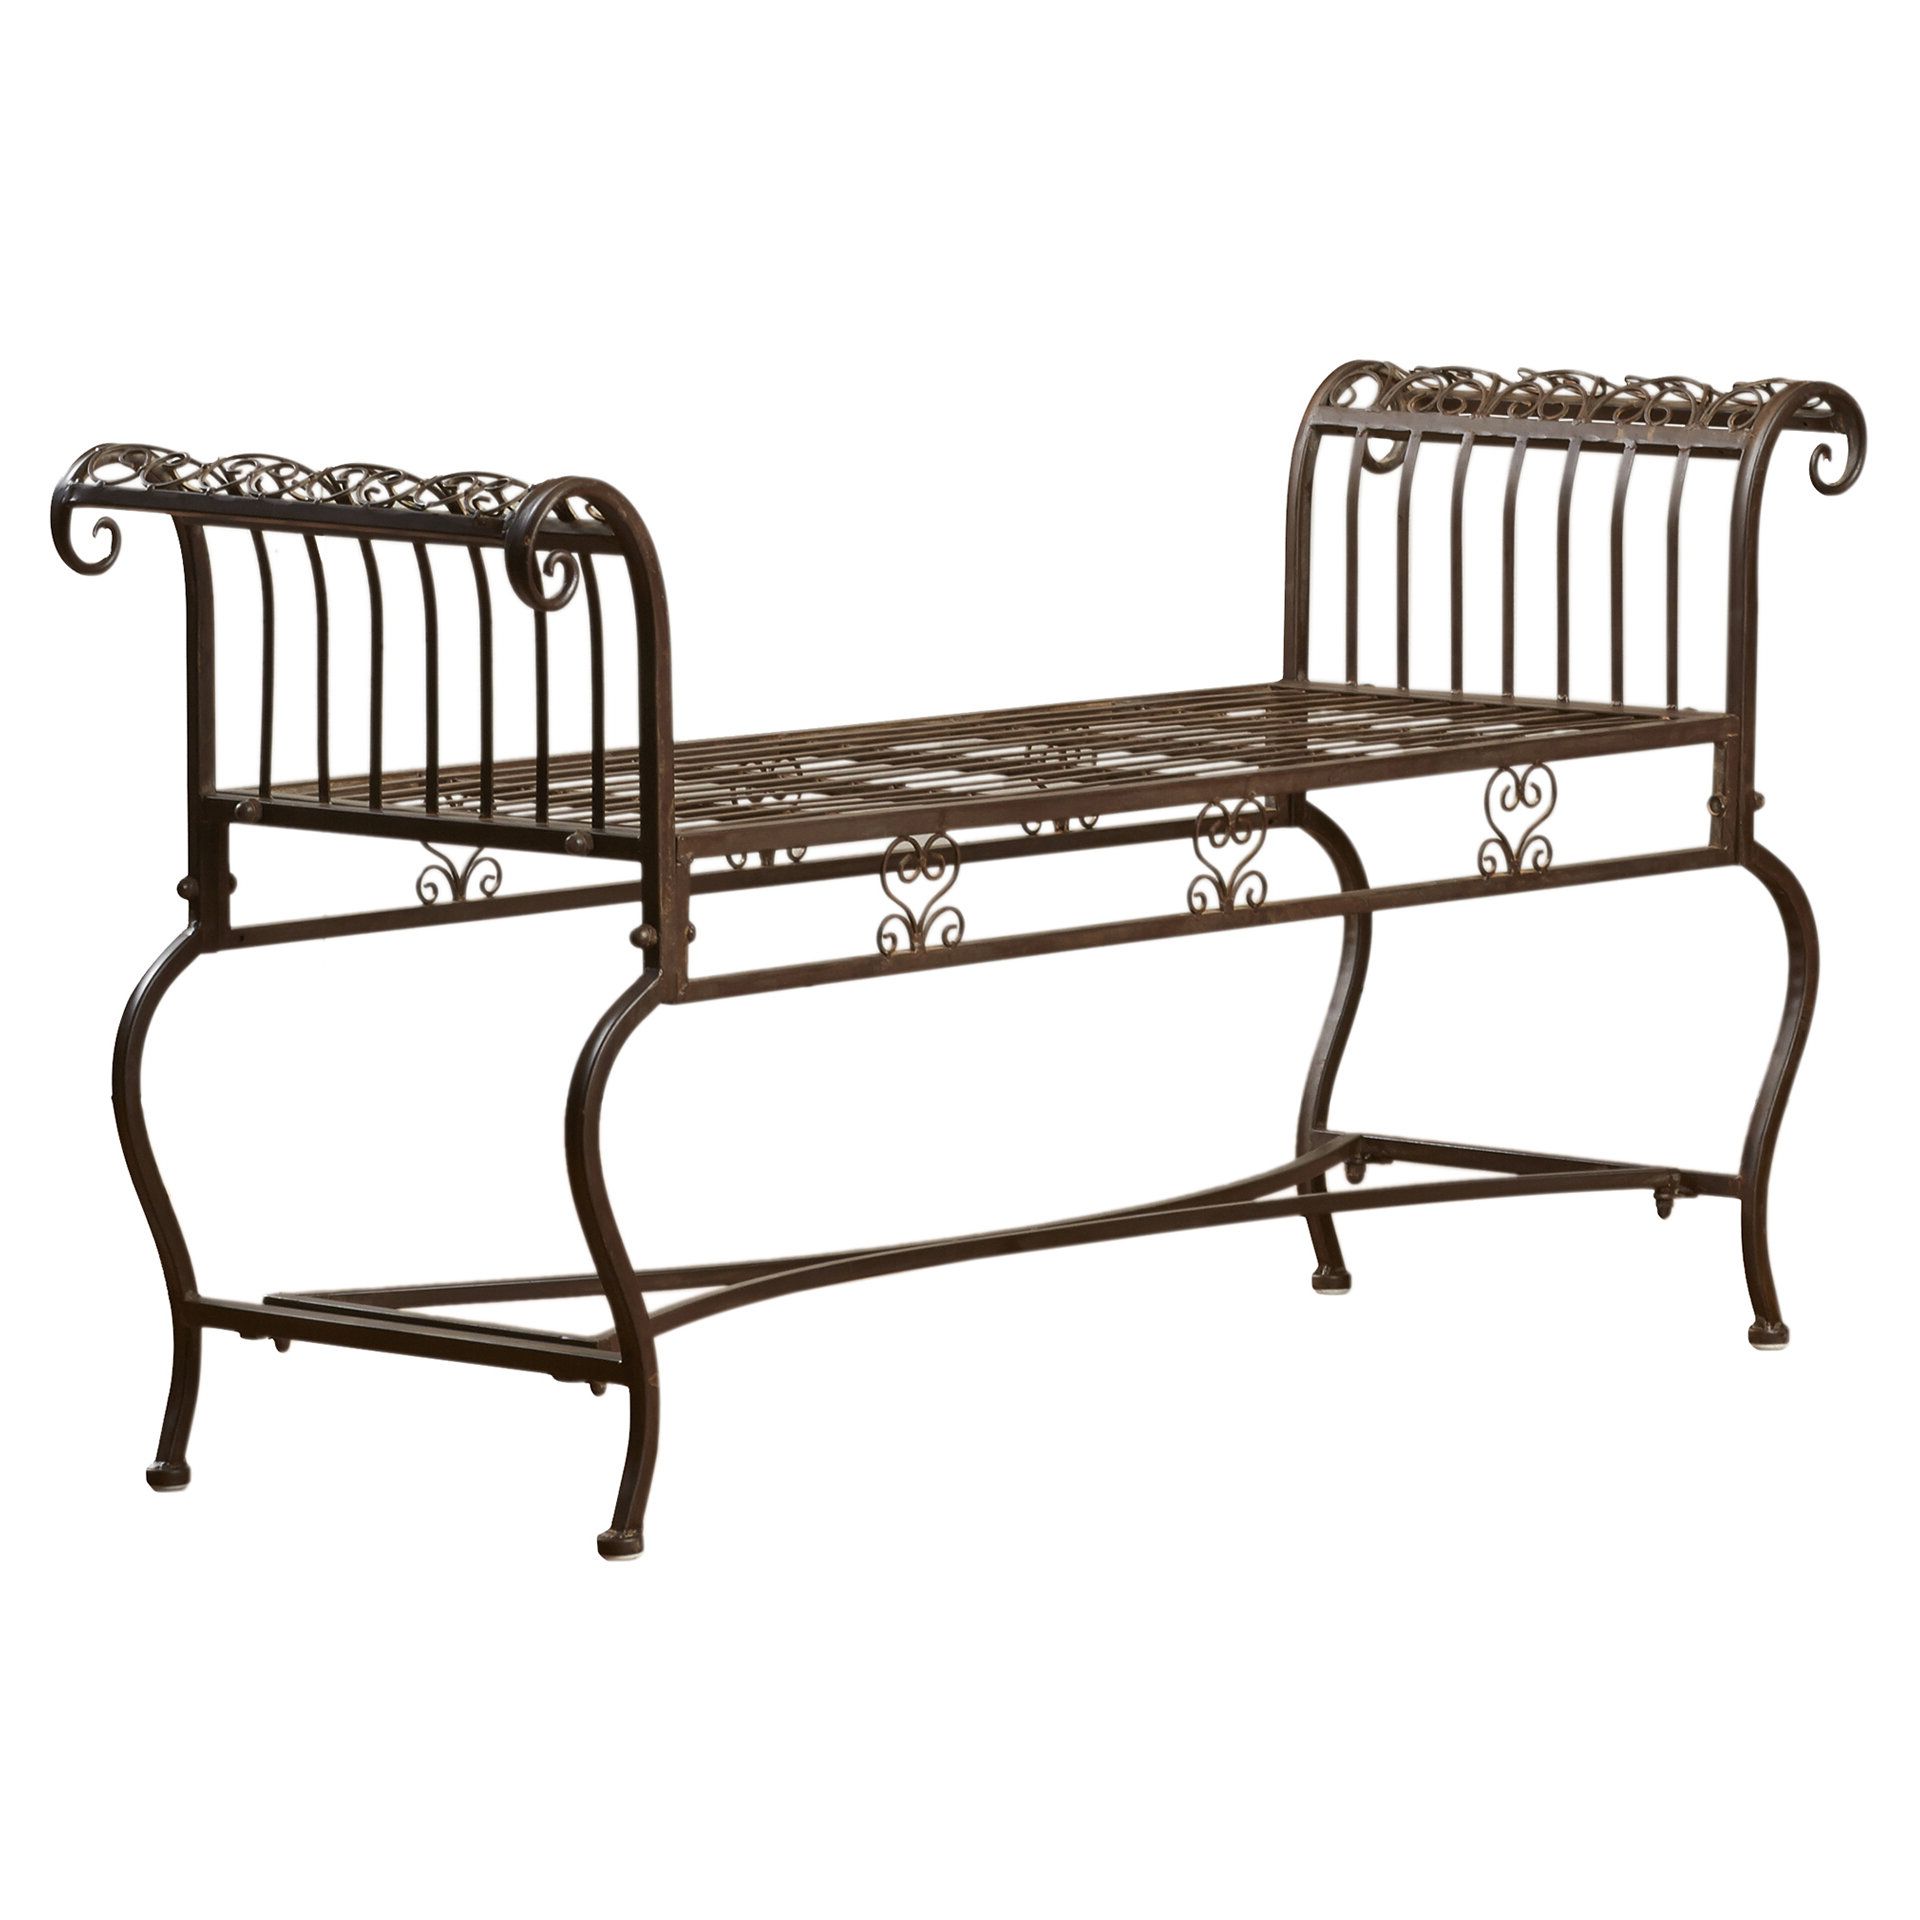 Cavin Garden Benches Within Widely Used Lemire Iron Garden Bench (View 16 of 30)